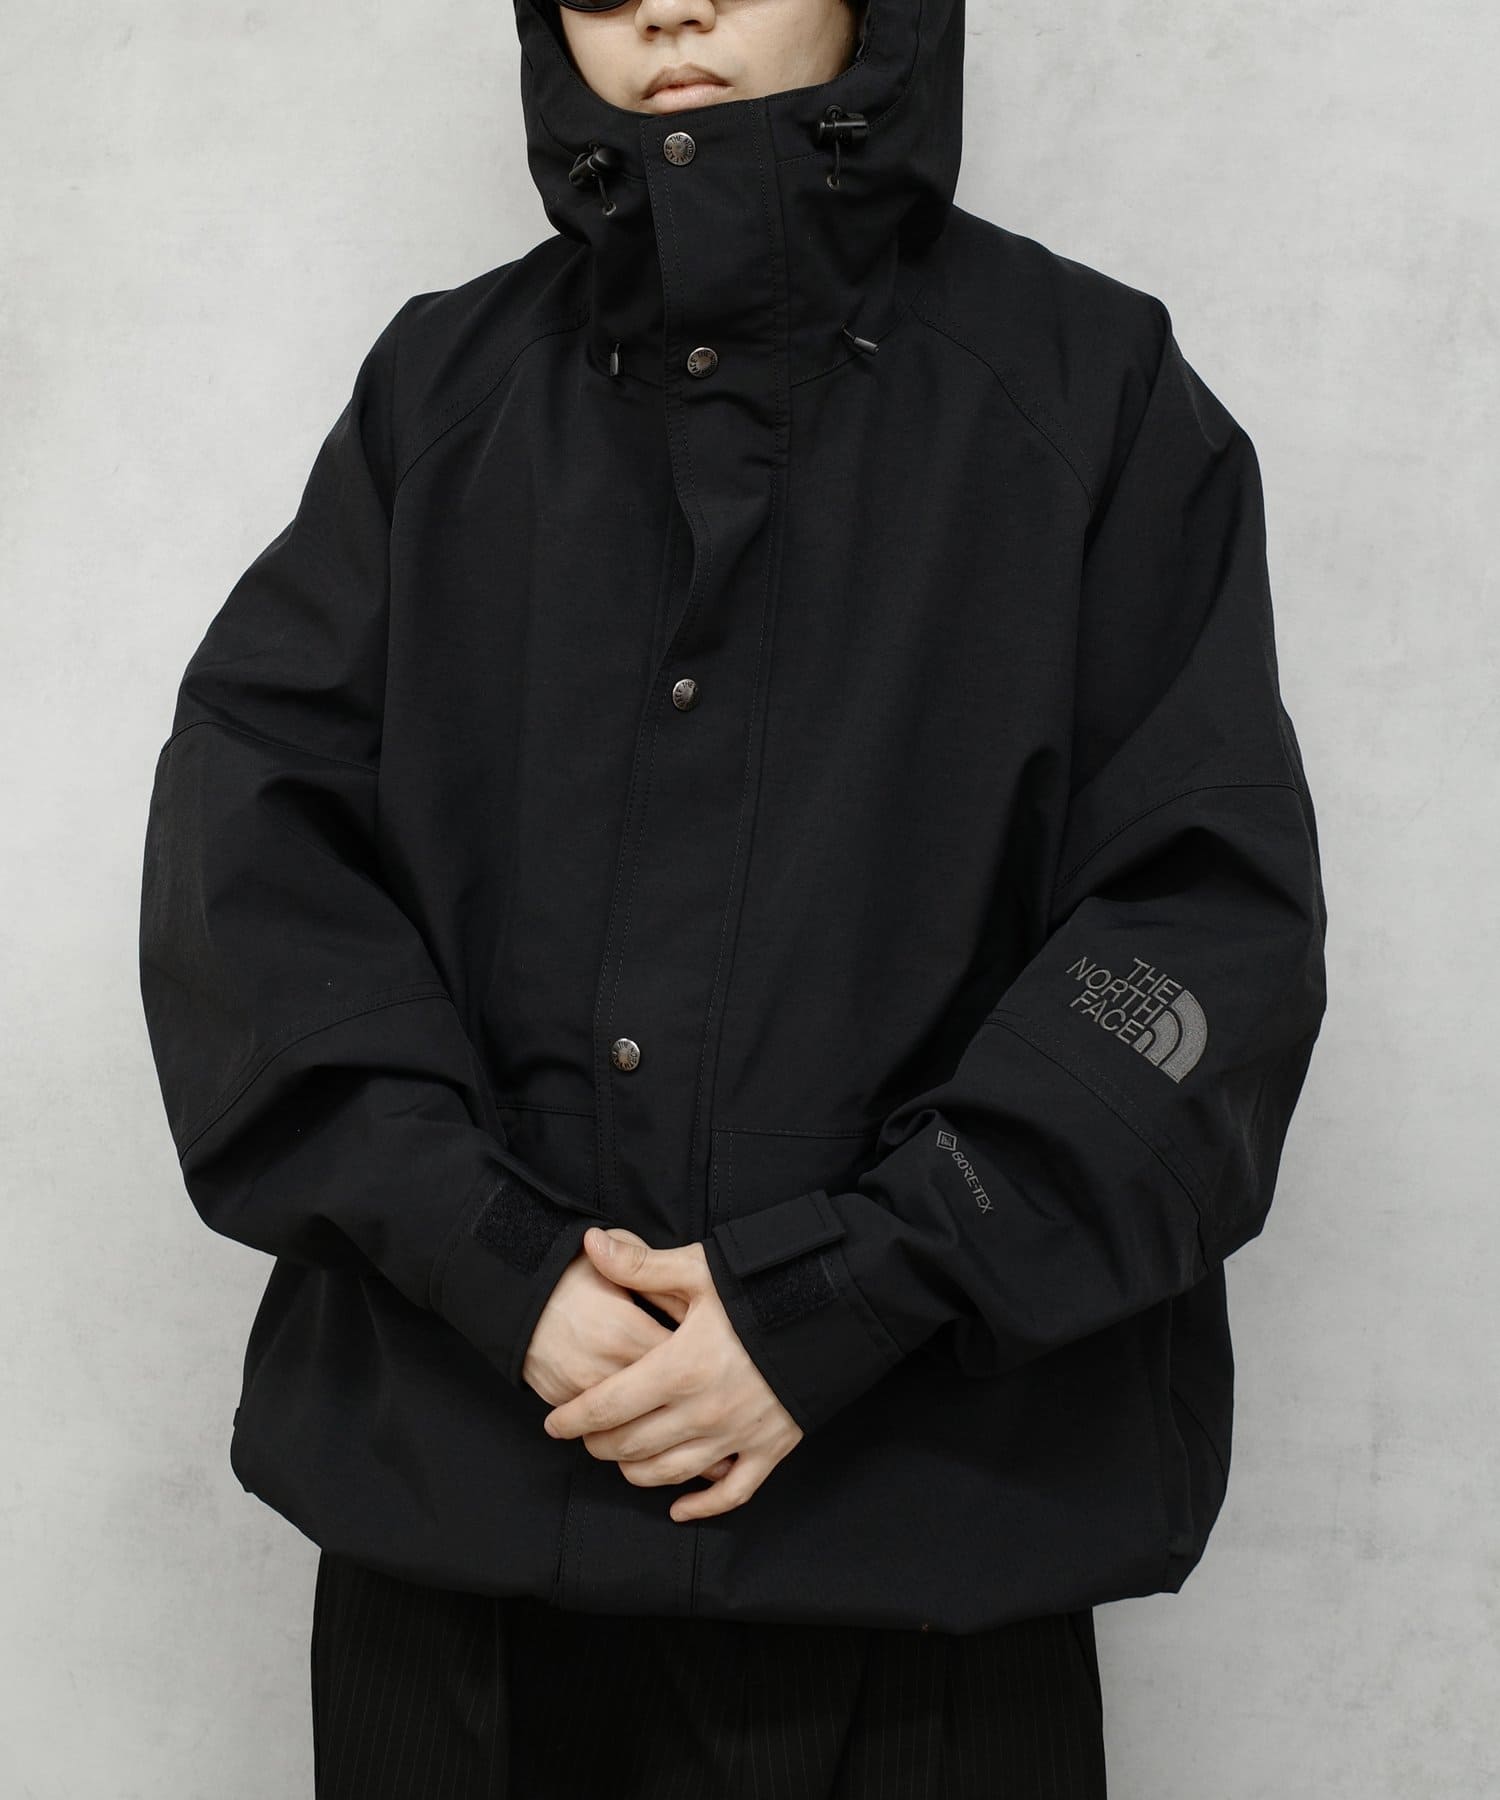 THE NORTH FACE_Compilation Jacket | WHO'S WHO gallery(フーズフー 